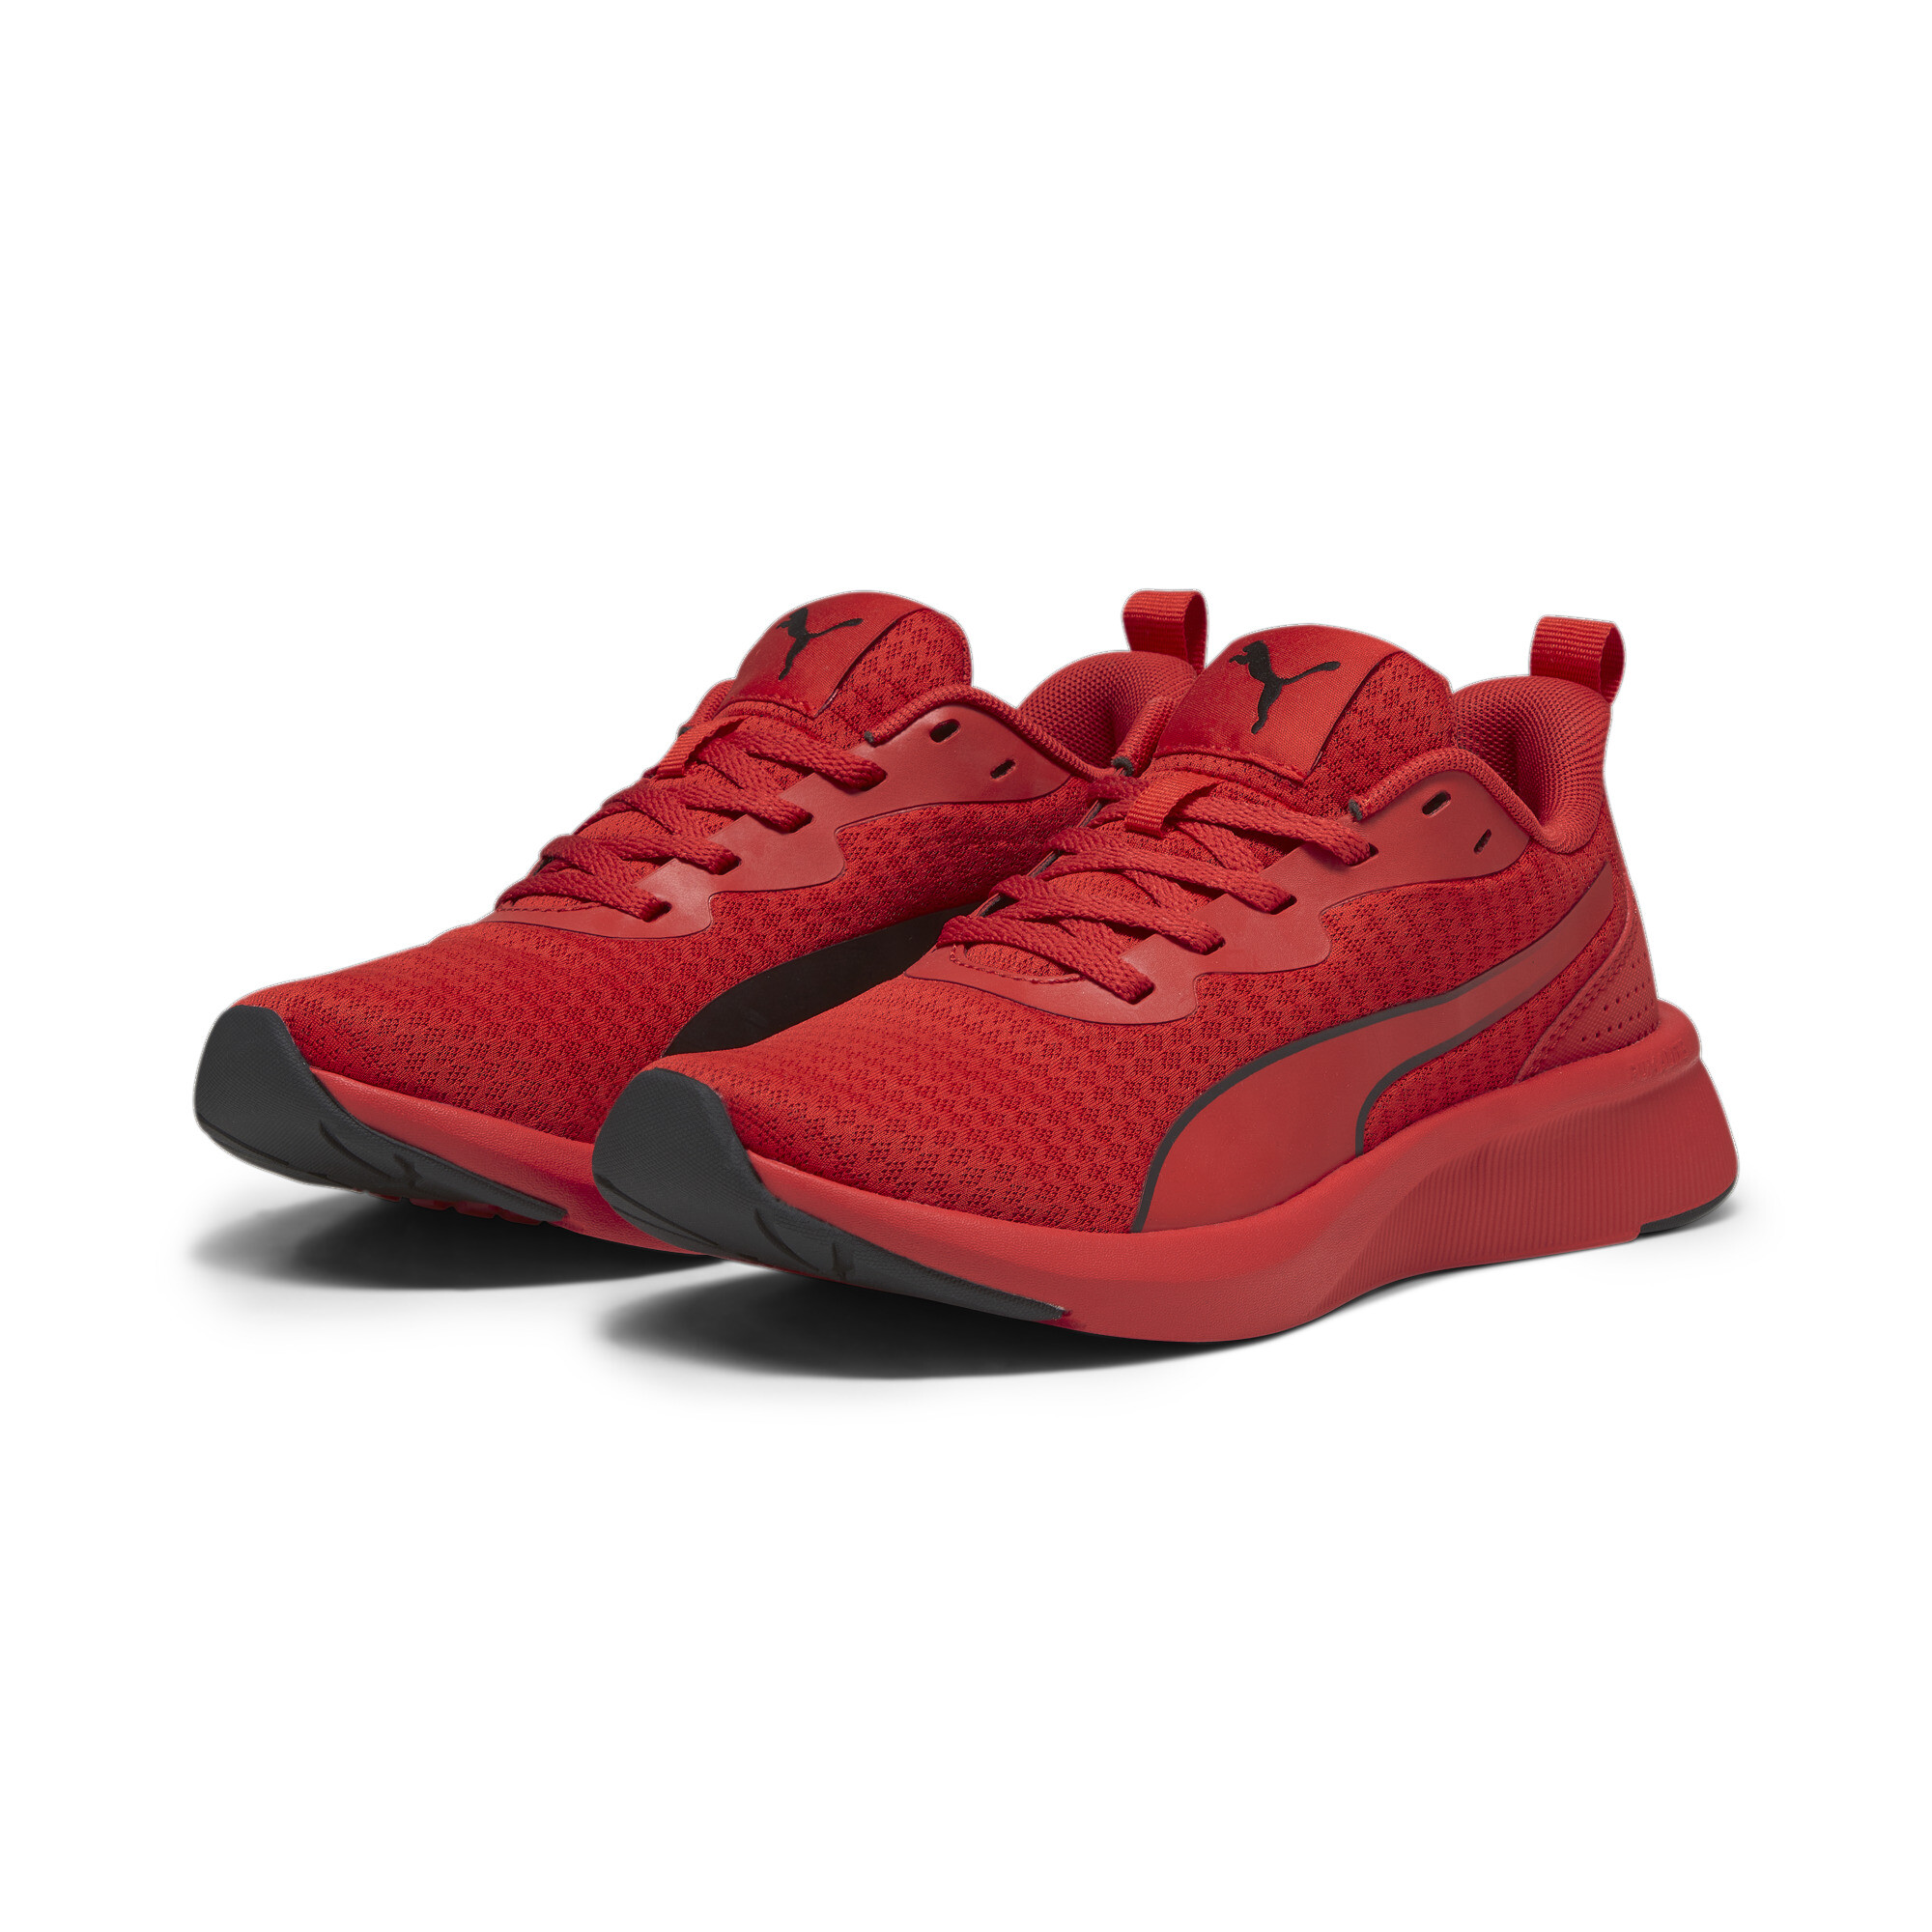 Puma Flyer Lite Youth Sneakers, Red, Size 37.5, Shoes